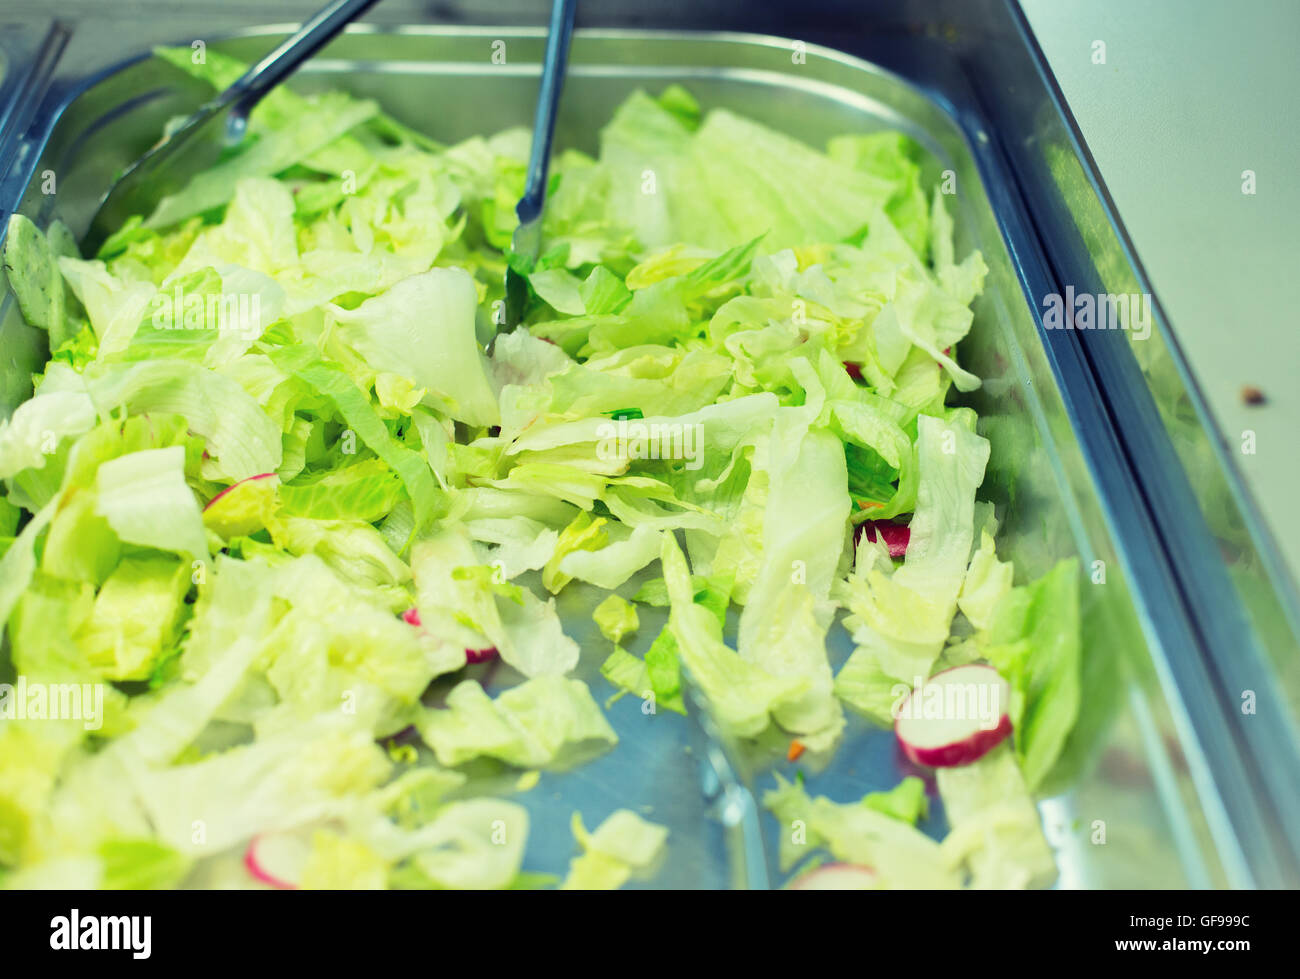 close up of romaine lettuce salad in container Stock Photo